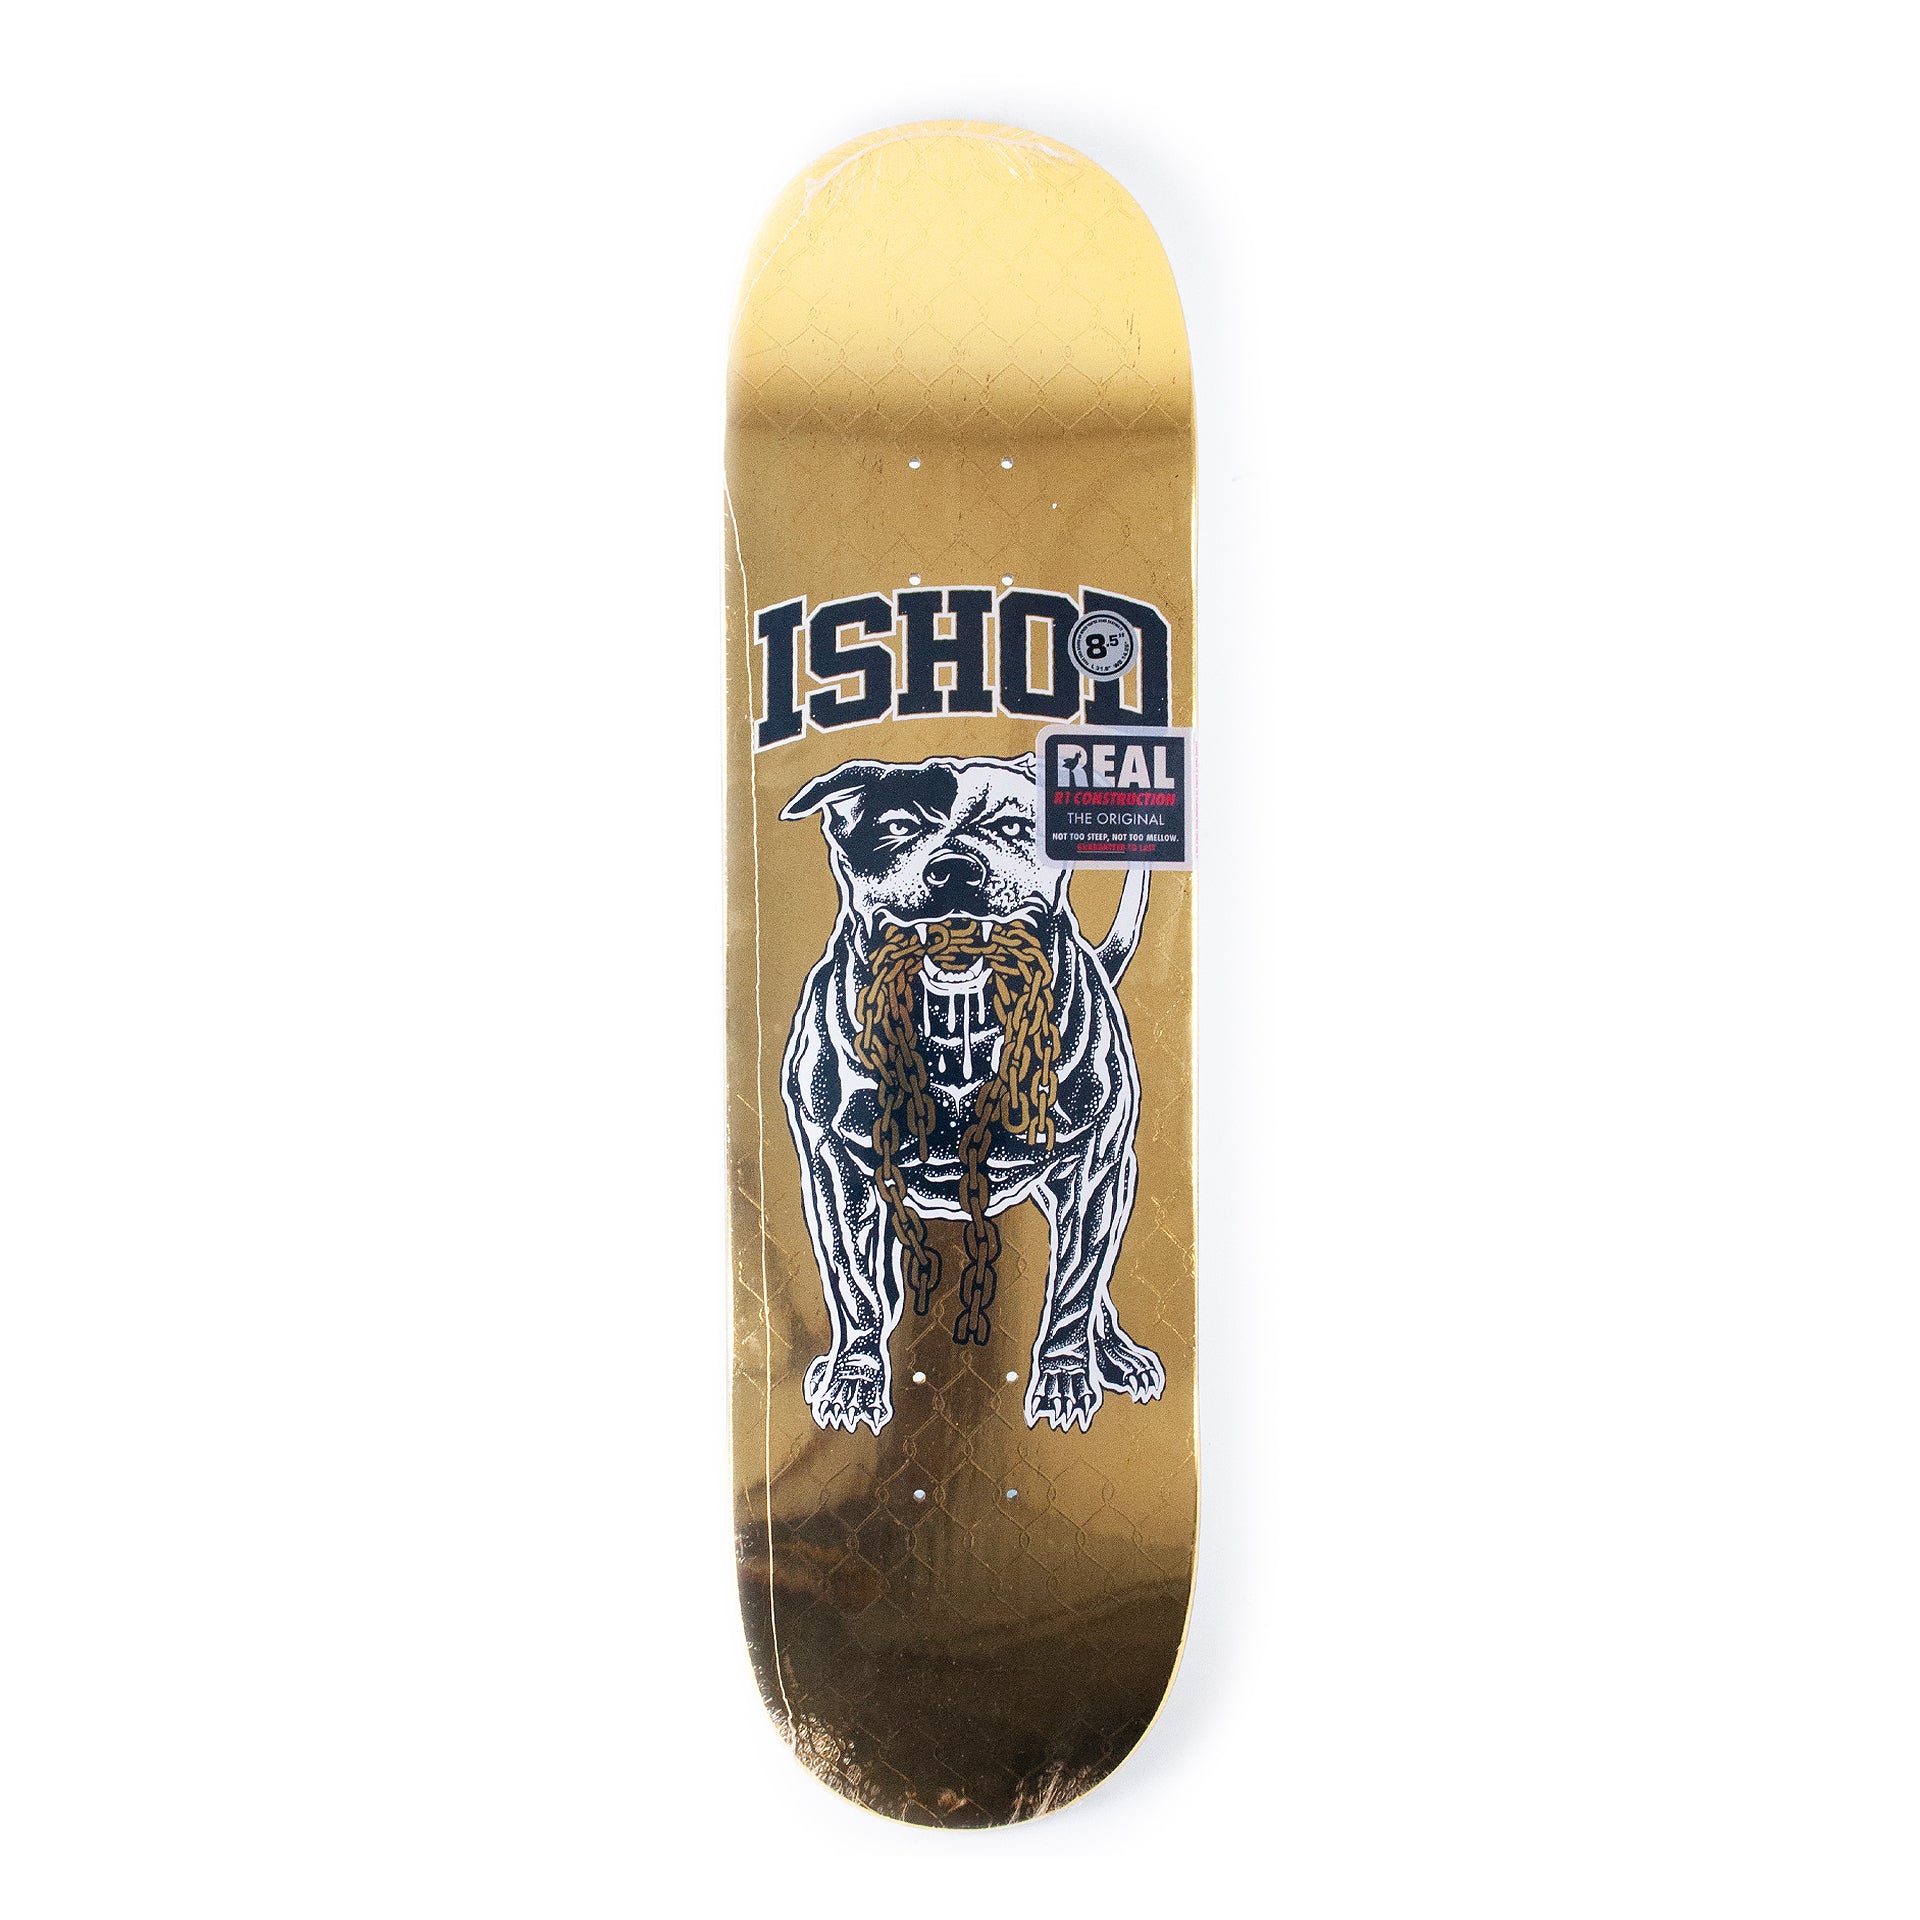 Ishod Skateshop Day Release Deck at Prime Delux Store Plymouth